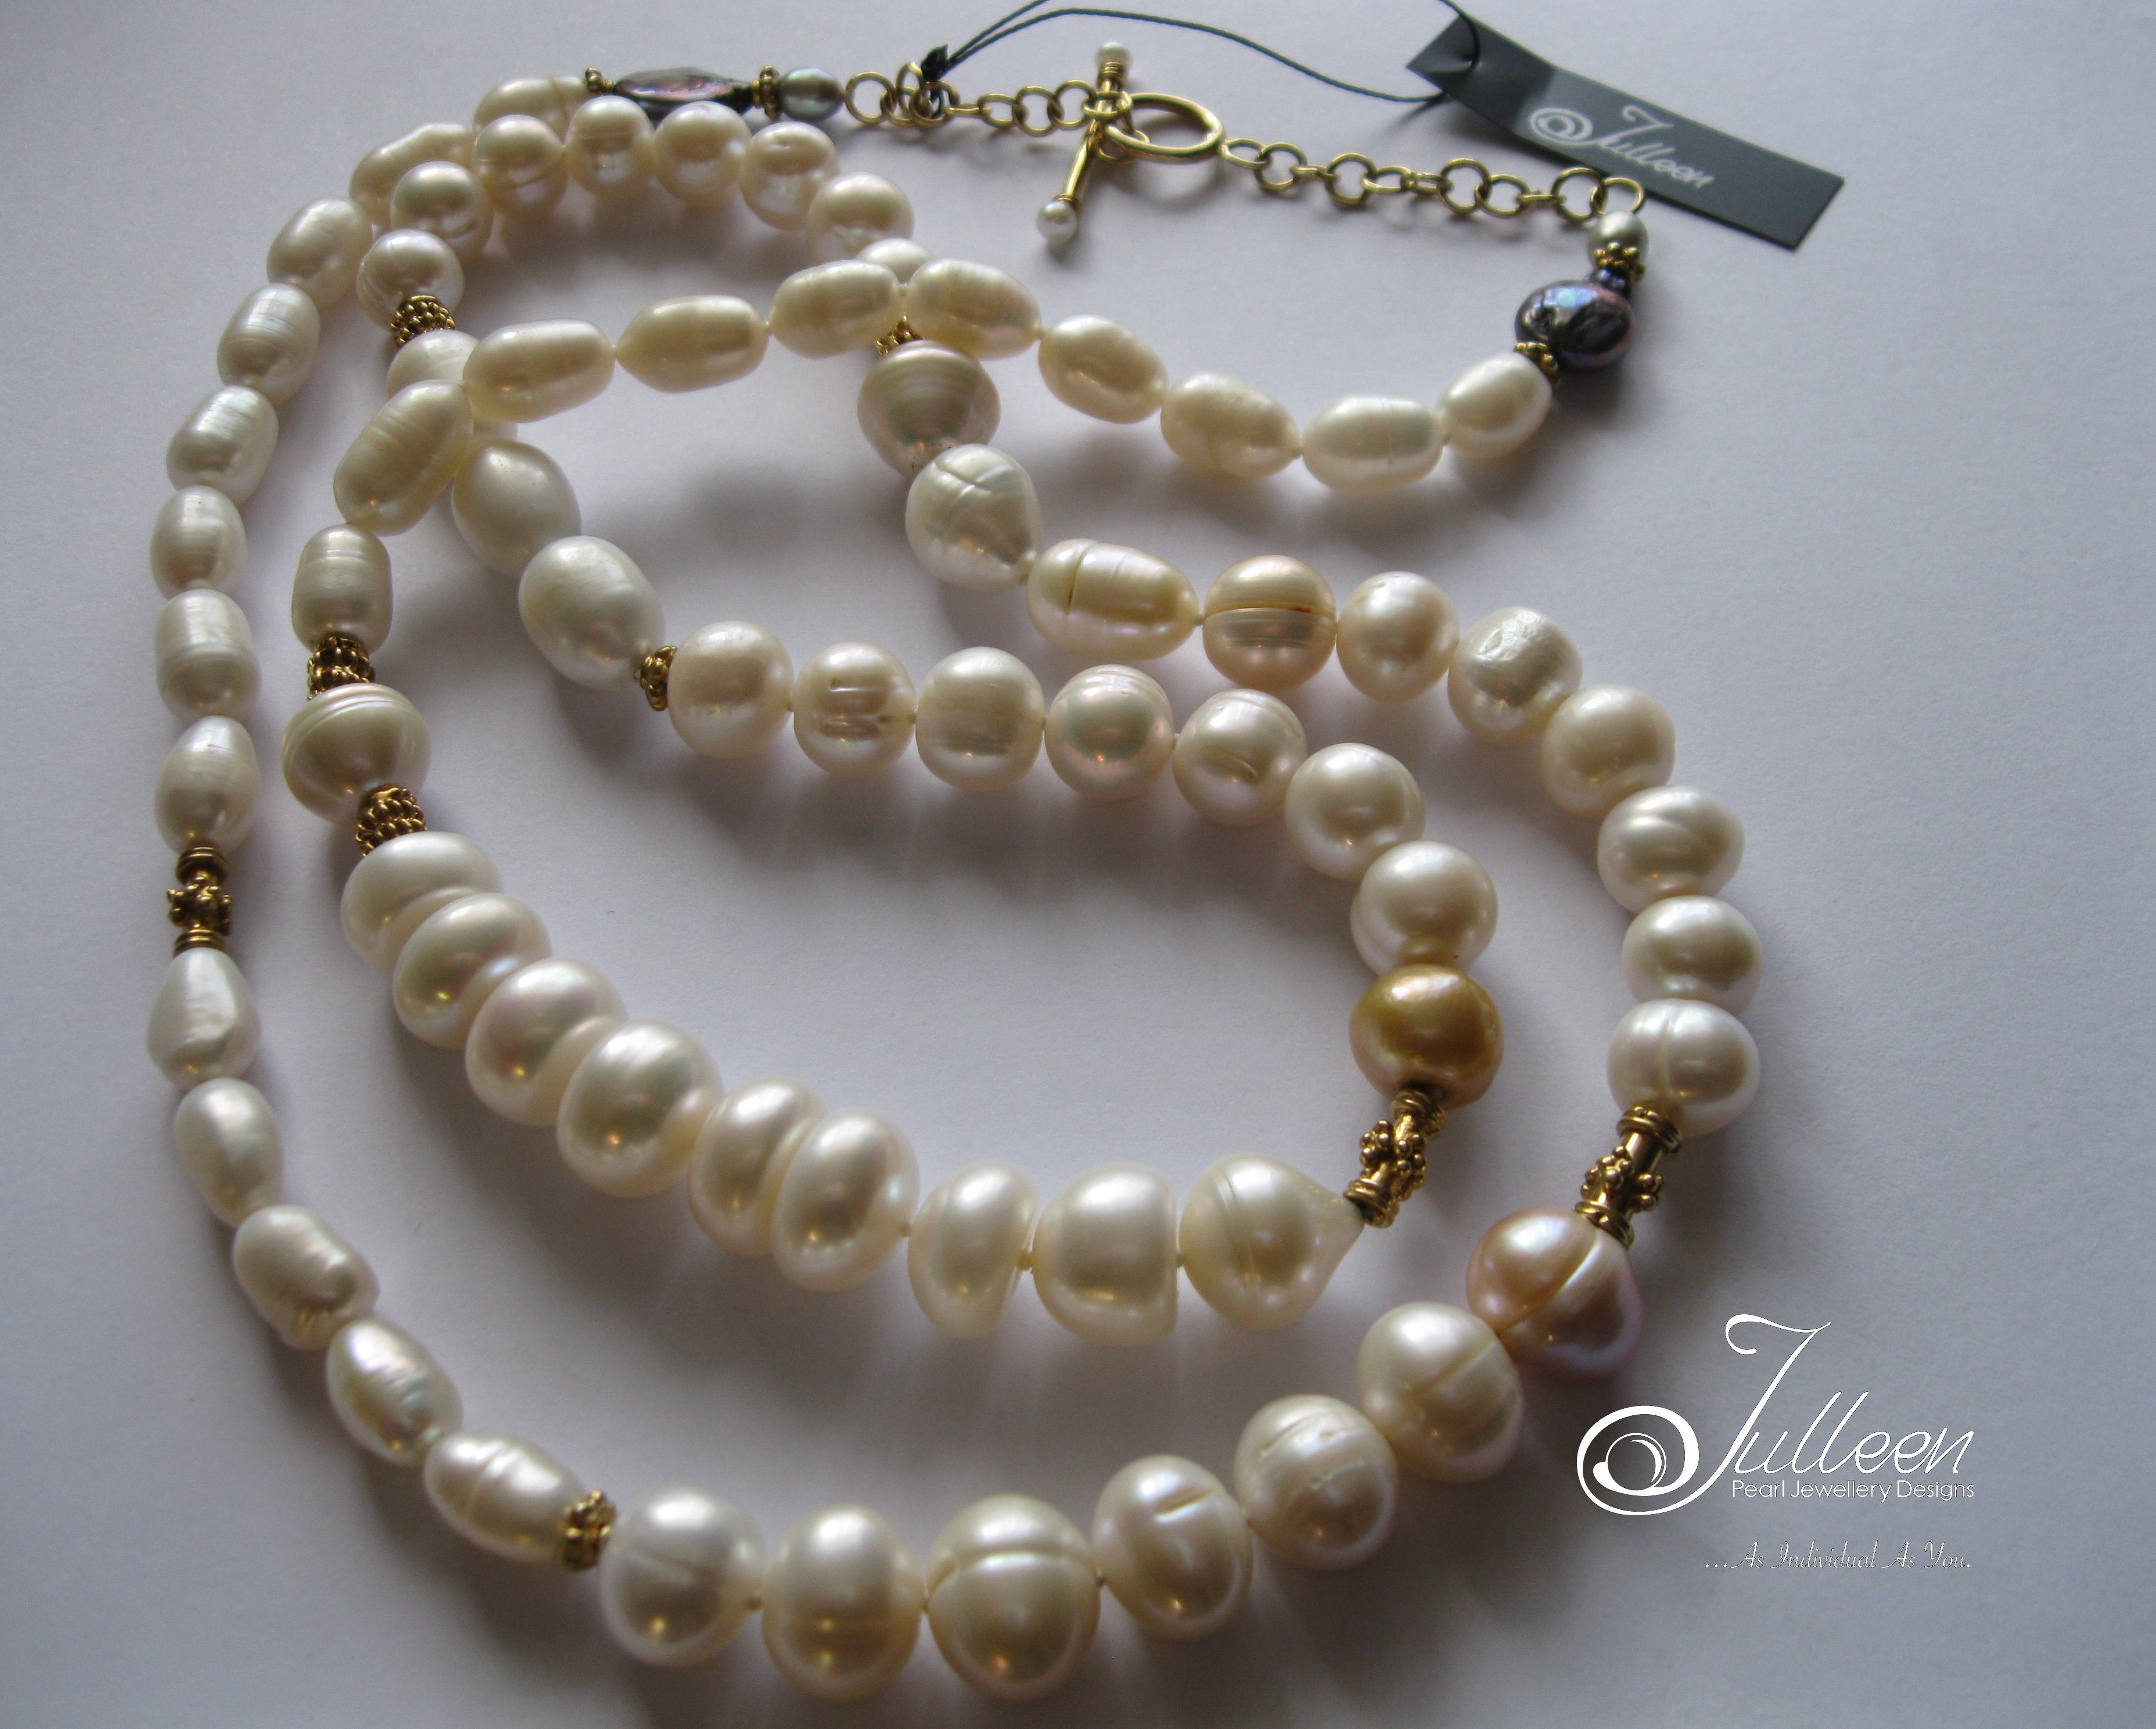 Julleen-Long-White Pearl-Necklace